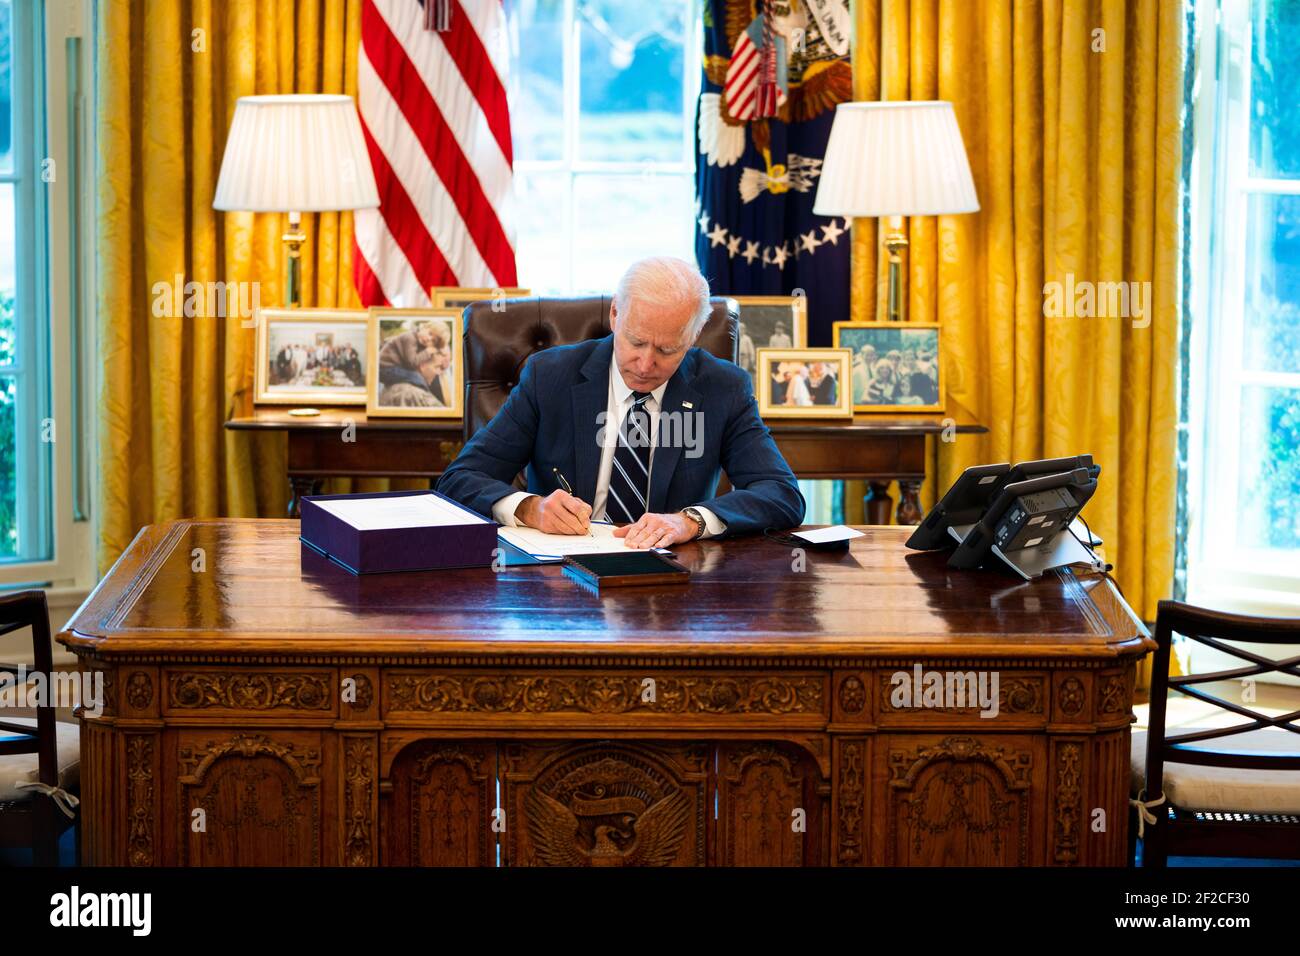 Washington, United States Of America. 11th Mar, 2021. United States President Joe Biden signs the American Rescue Plan with Vice President Kamala Harris looking on in the Oval Office, Thursday, March, 11, 2021. Credit: Doug Mills/Pool via CNP | usage worldwide Credit: dpa/Alamy Live News Stock Photo